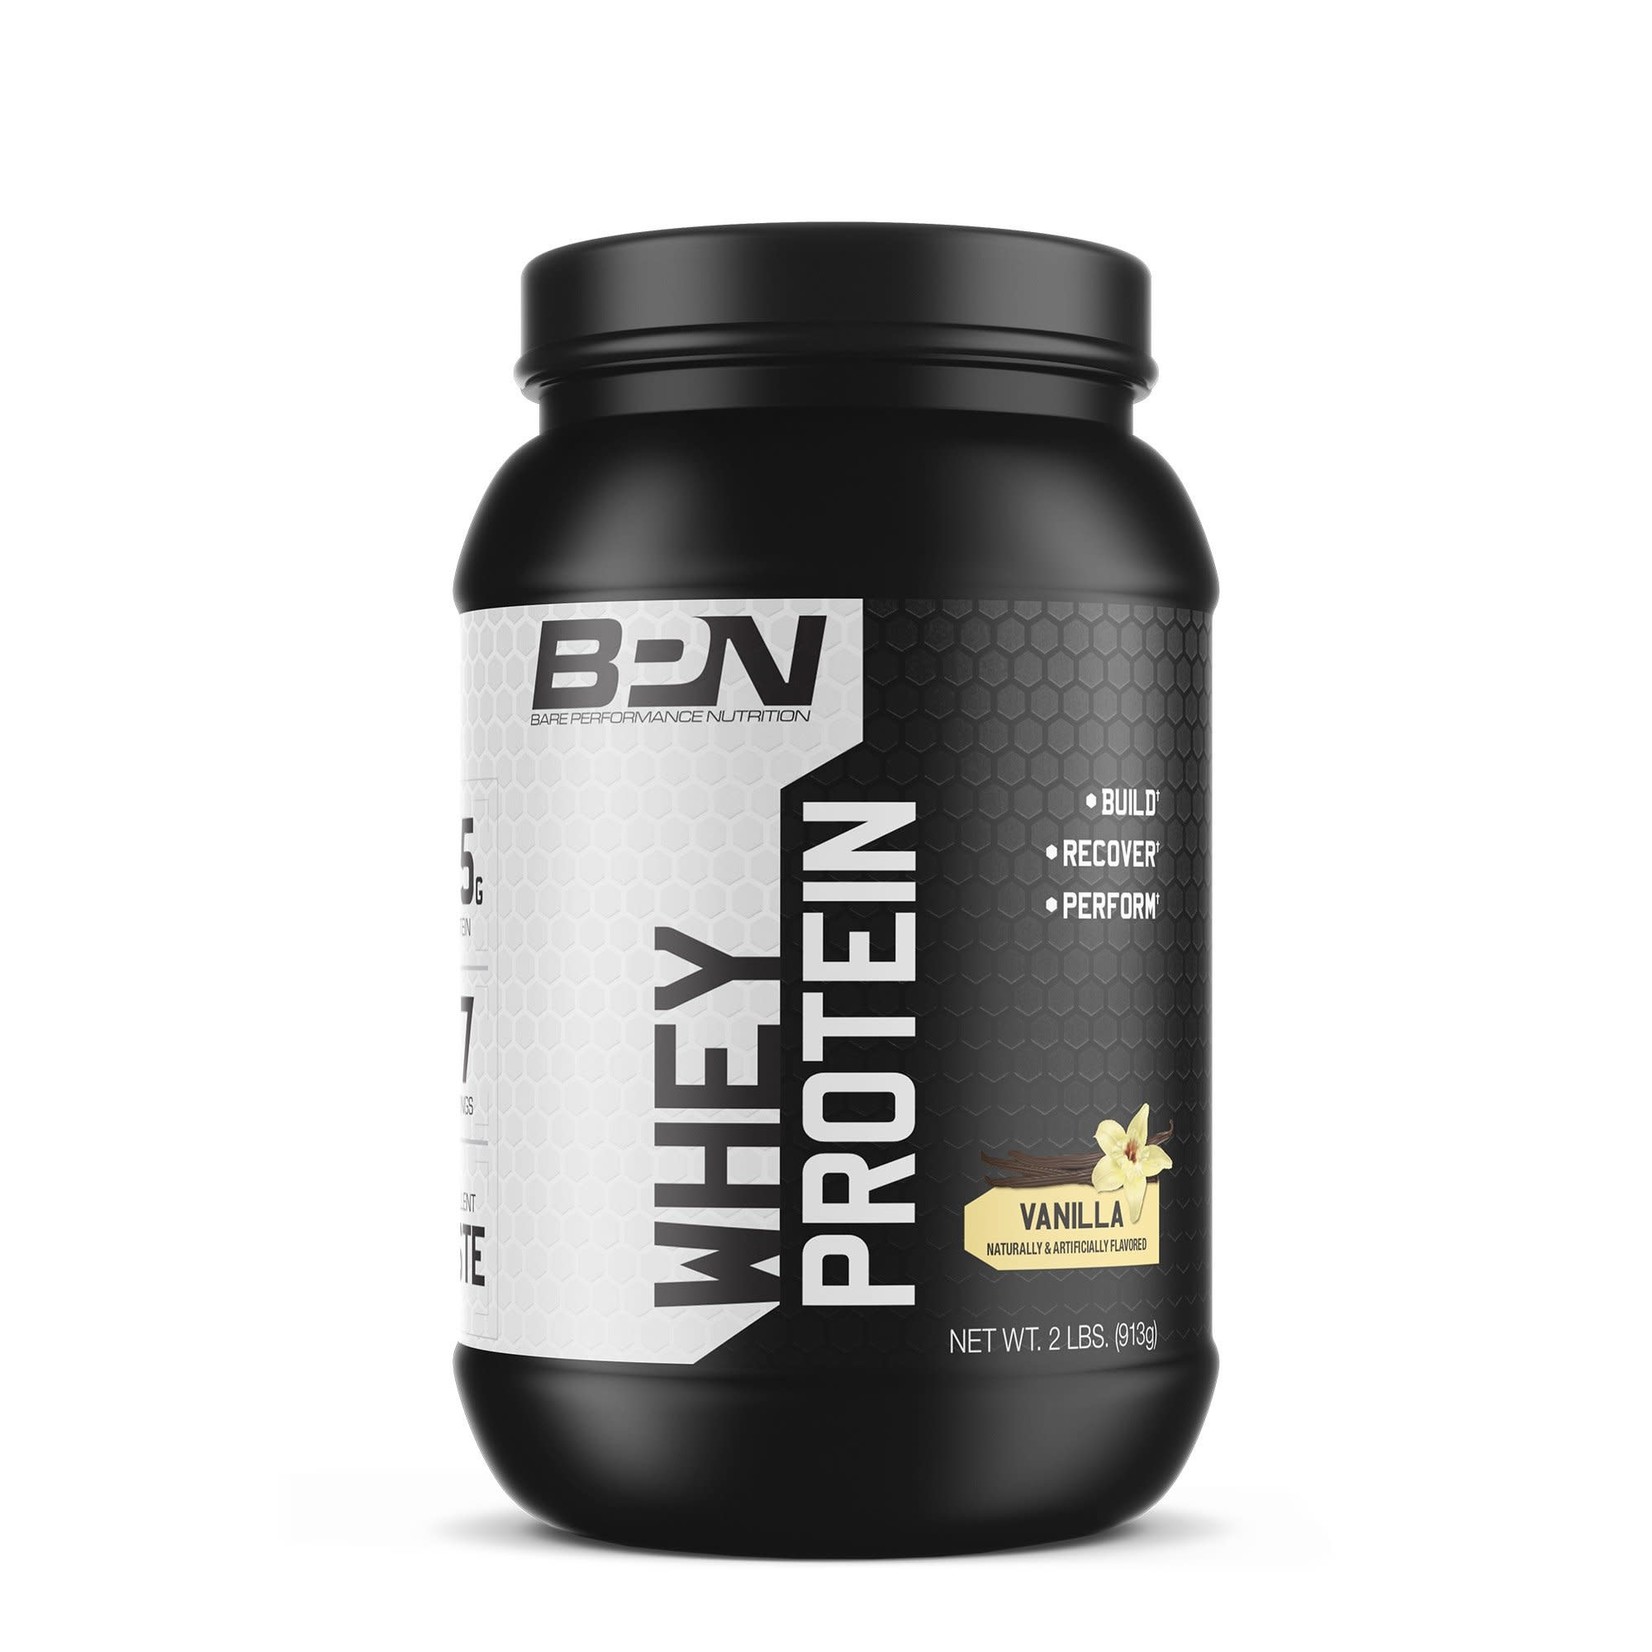 Bare Performance Nutrition BPN Whey Protein